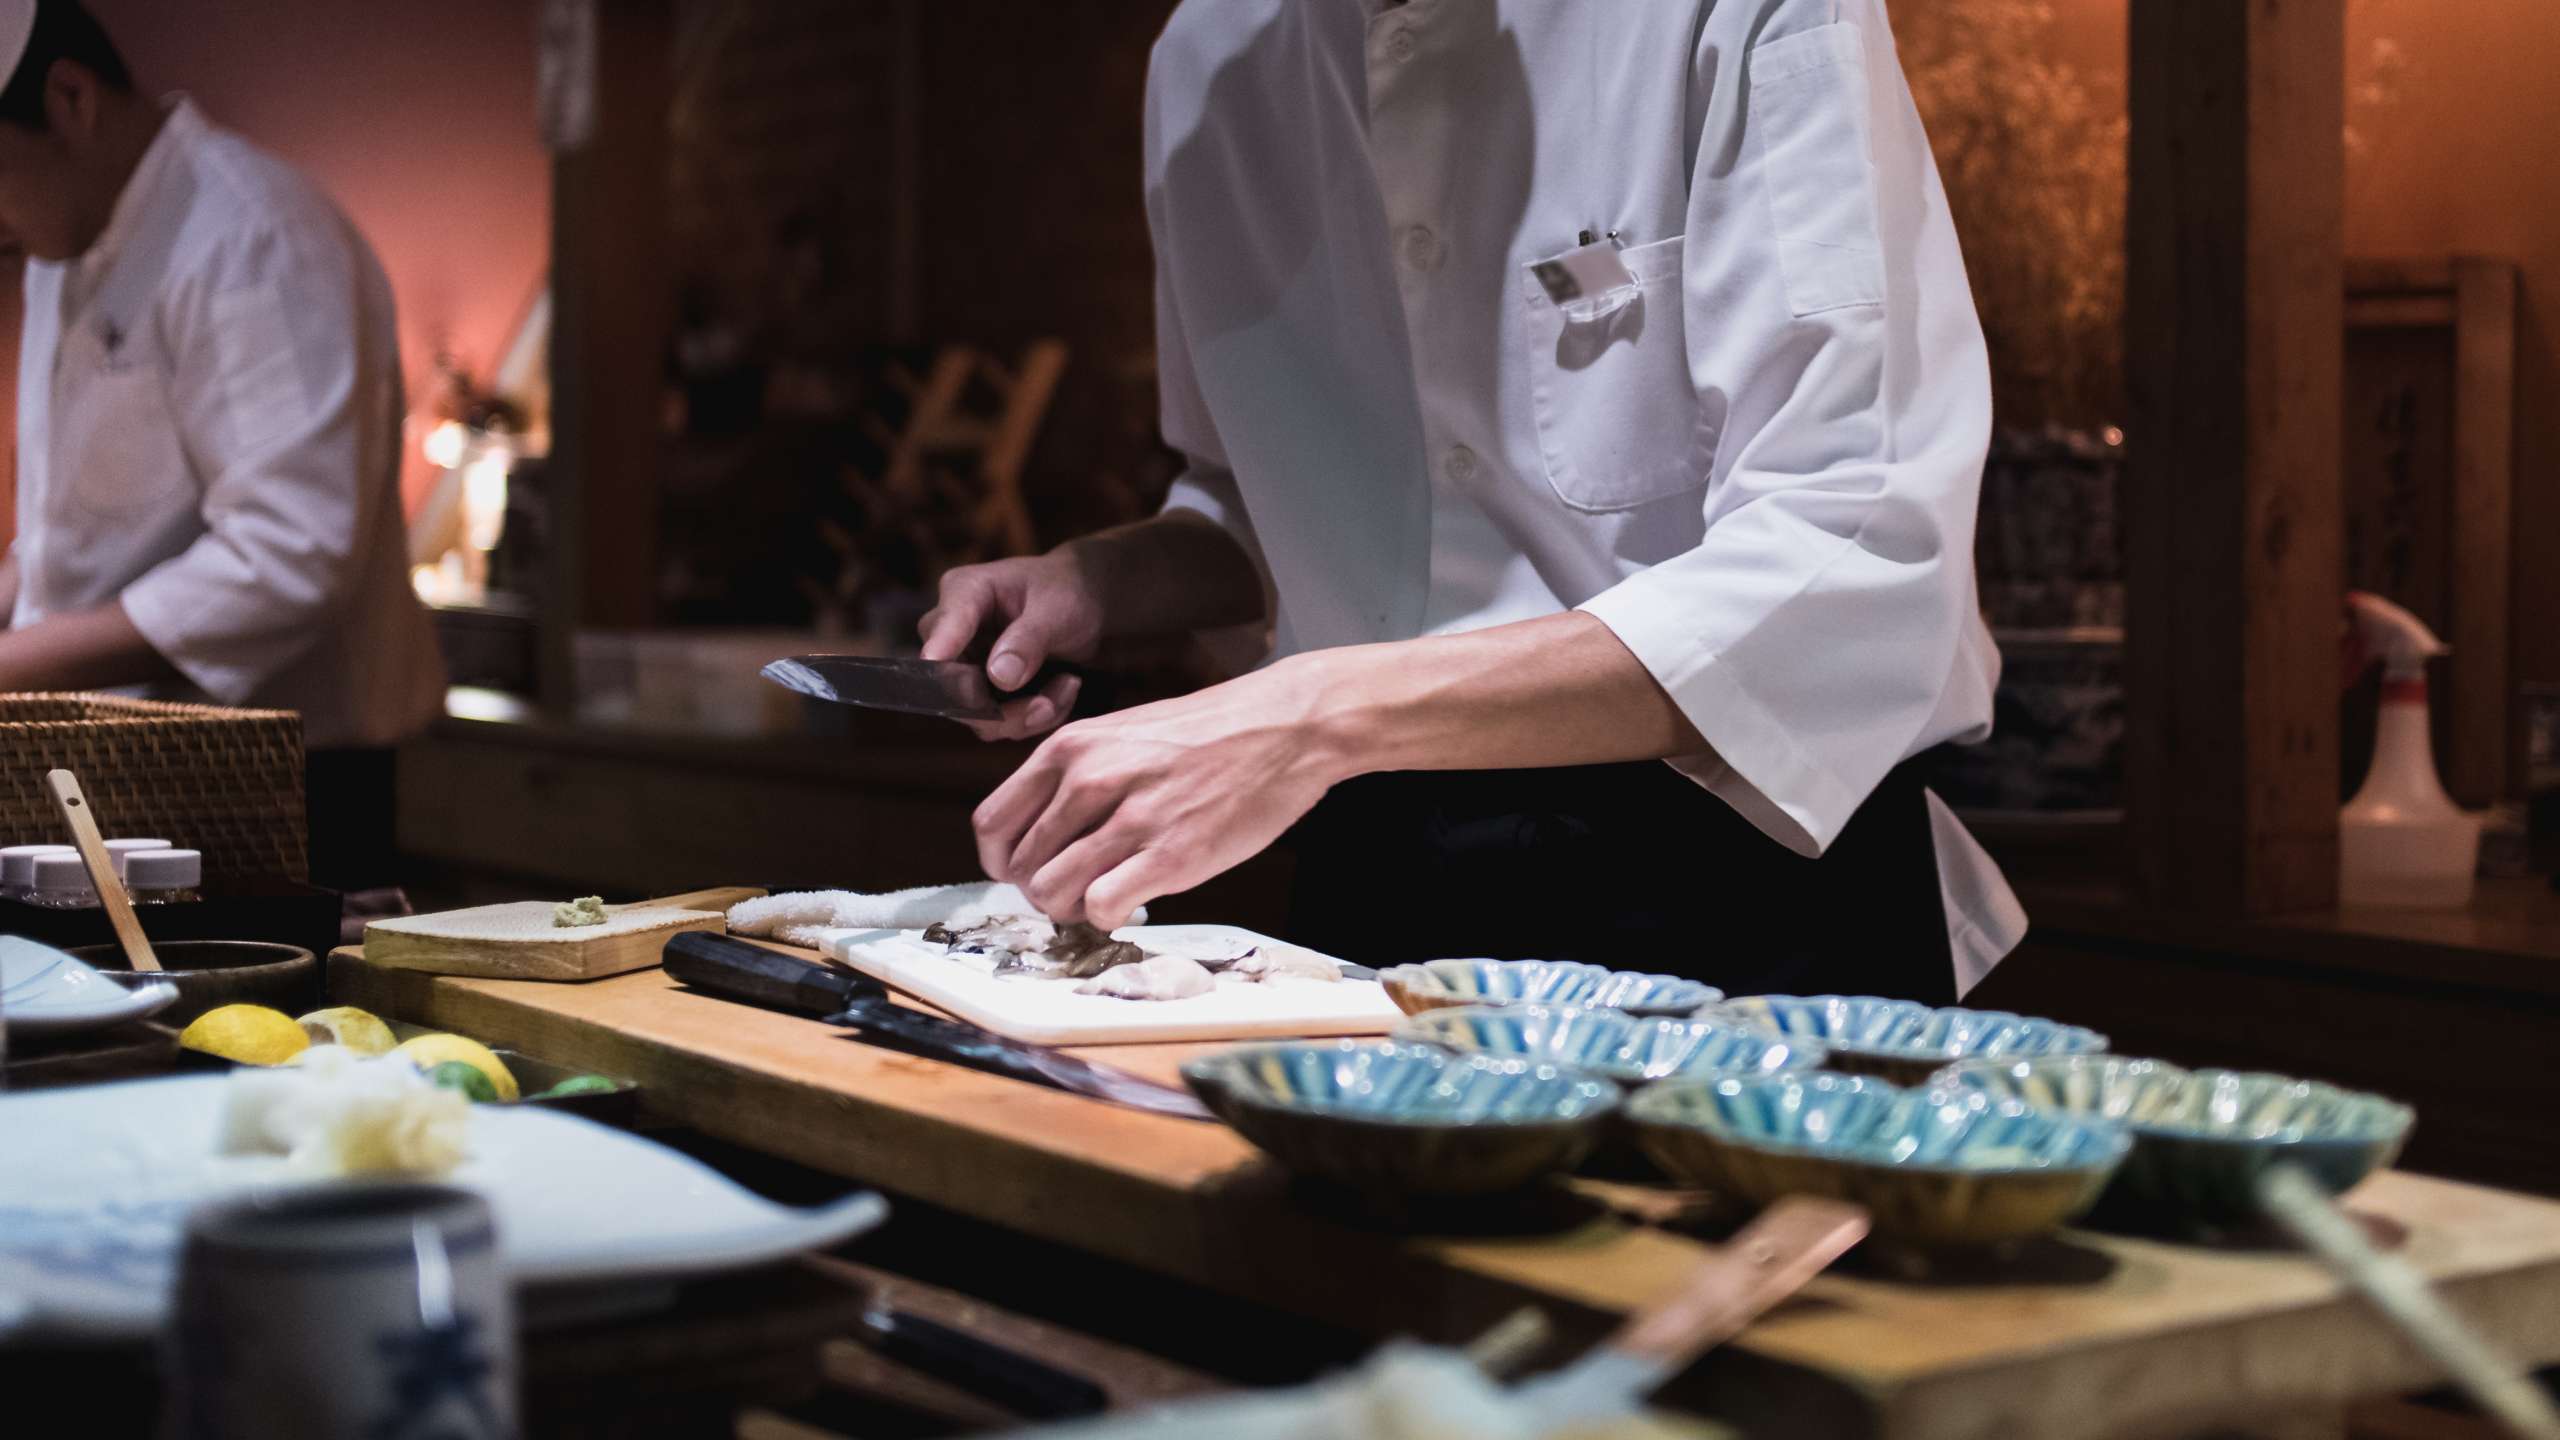 Chef preparing slicing oysters, Omakase style Japanese tradition